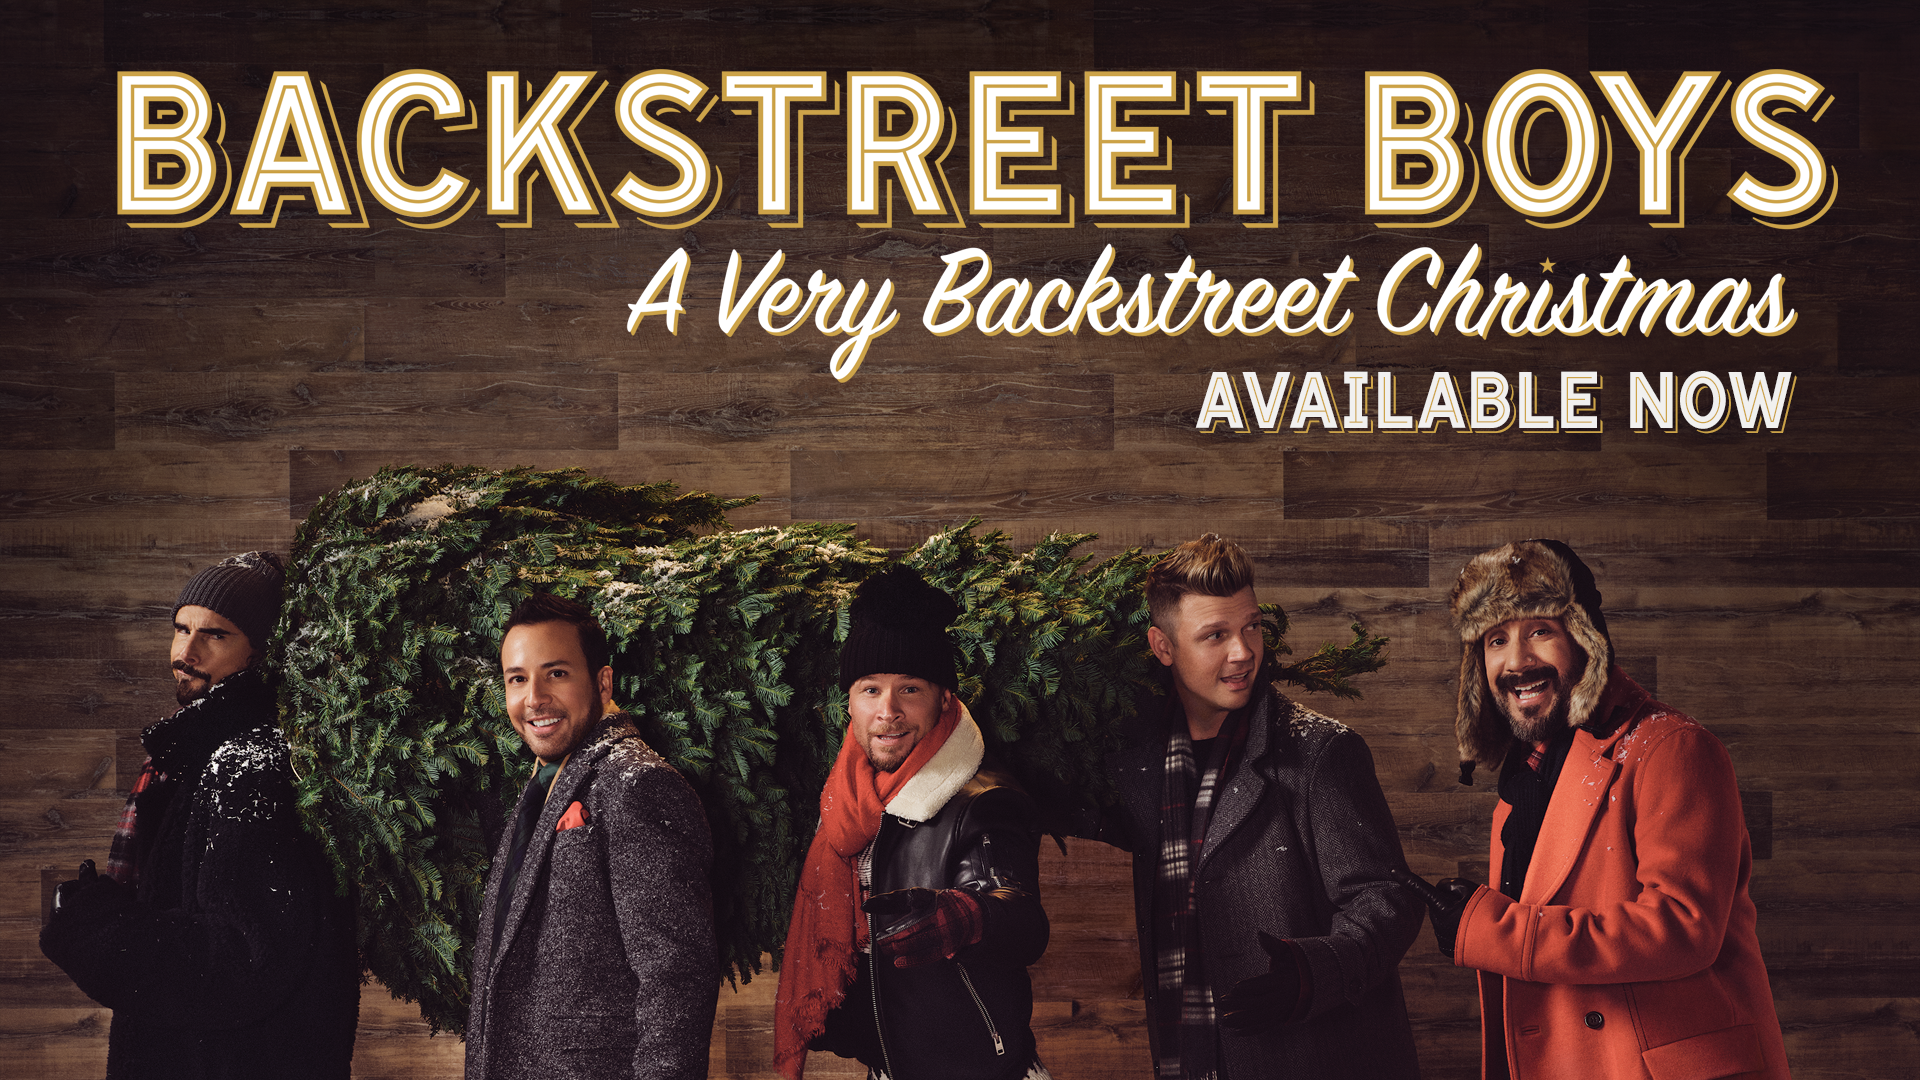 ‘A VERY BACKSTREET CHRISTMAS’ OUT NOW